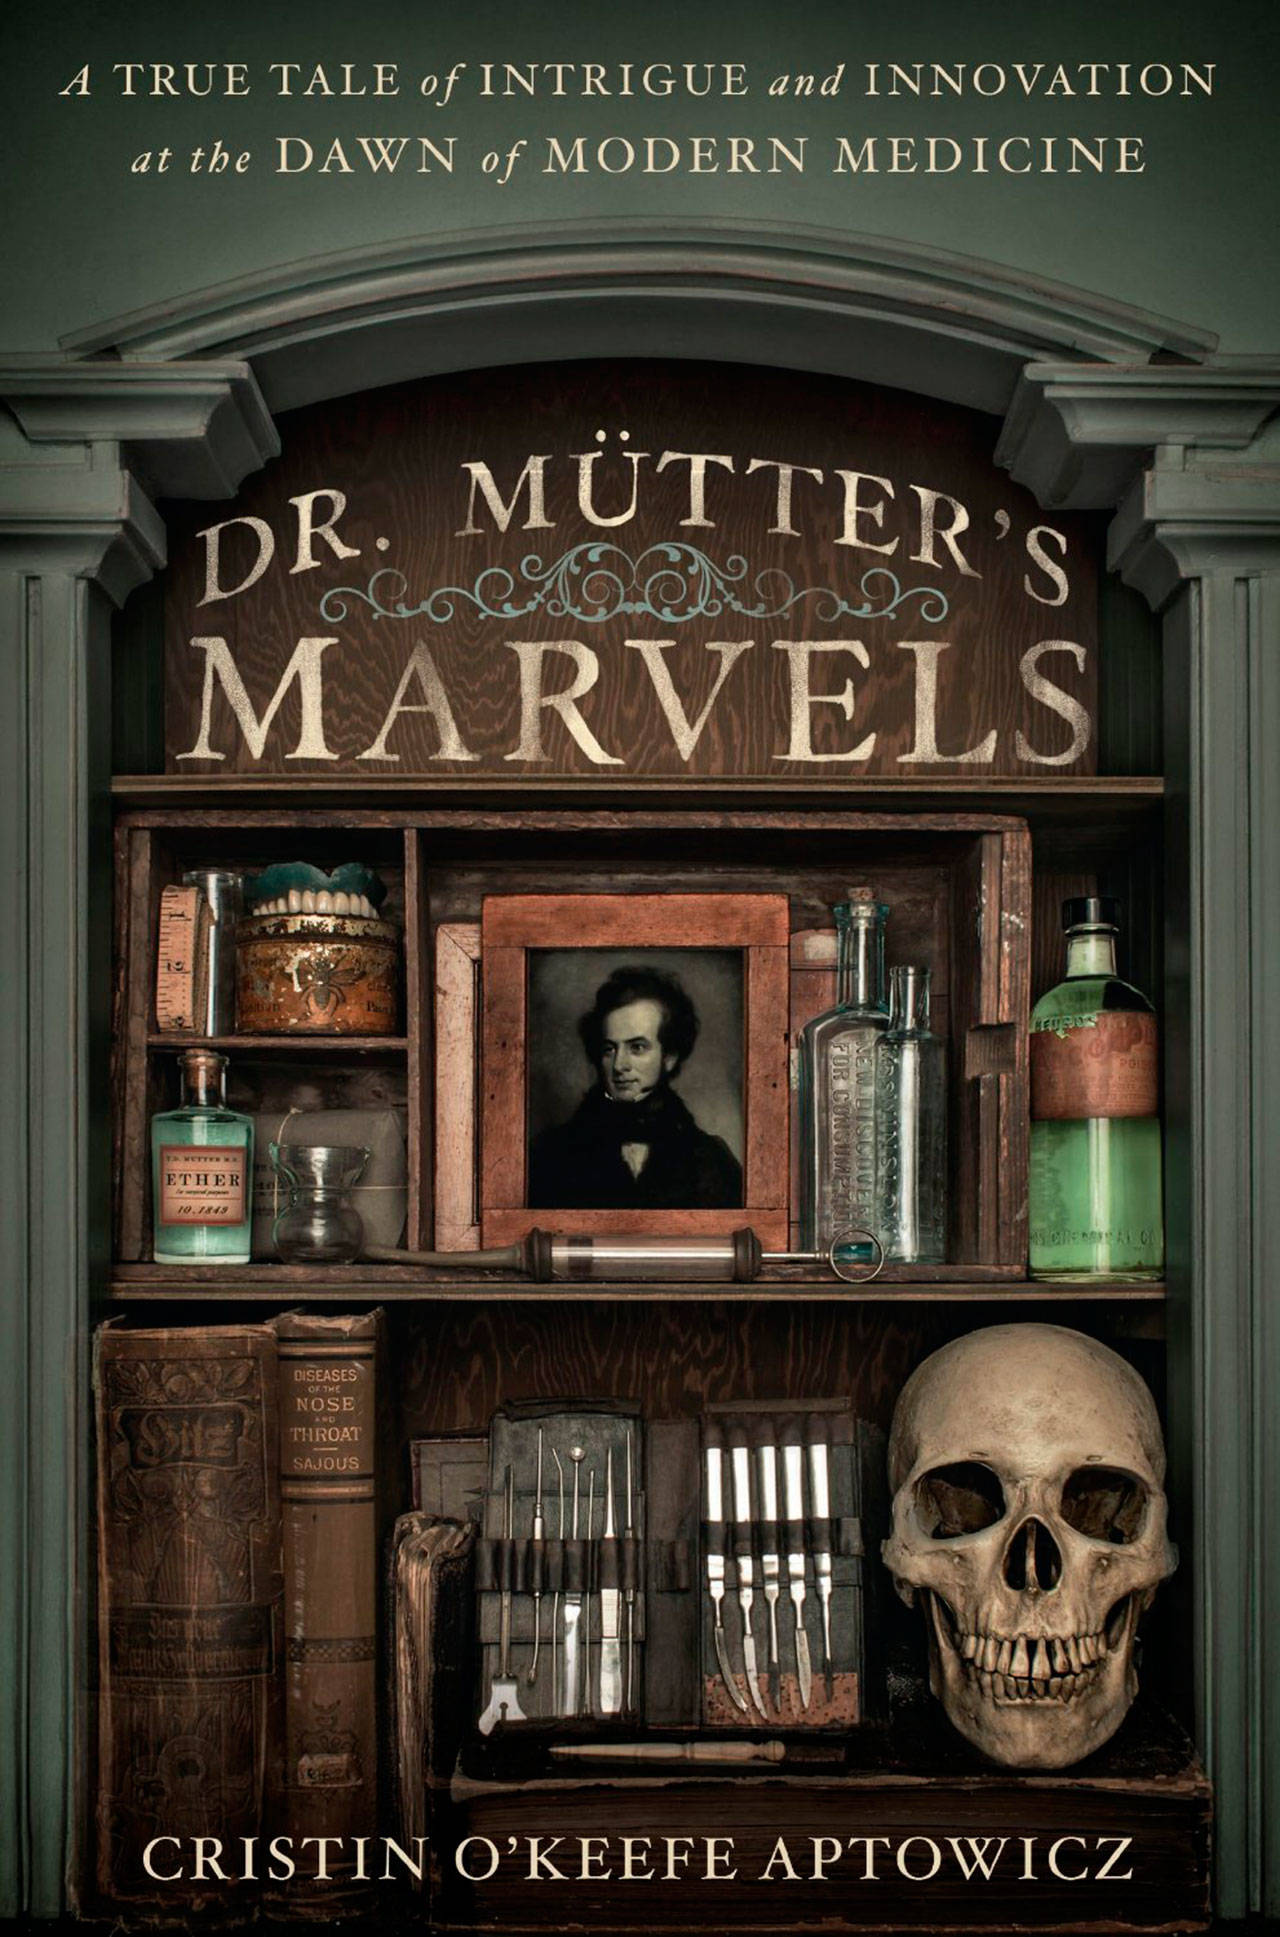 Image courtesy of Avery Publishing | “Dr. Mütter’s Marvels: A True Tale of Intrigue and Innovation at the Dawn of Modern Medicine” by Cristin O’Keefe Aptowicz.